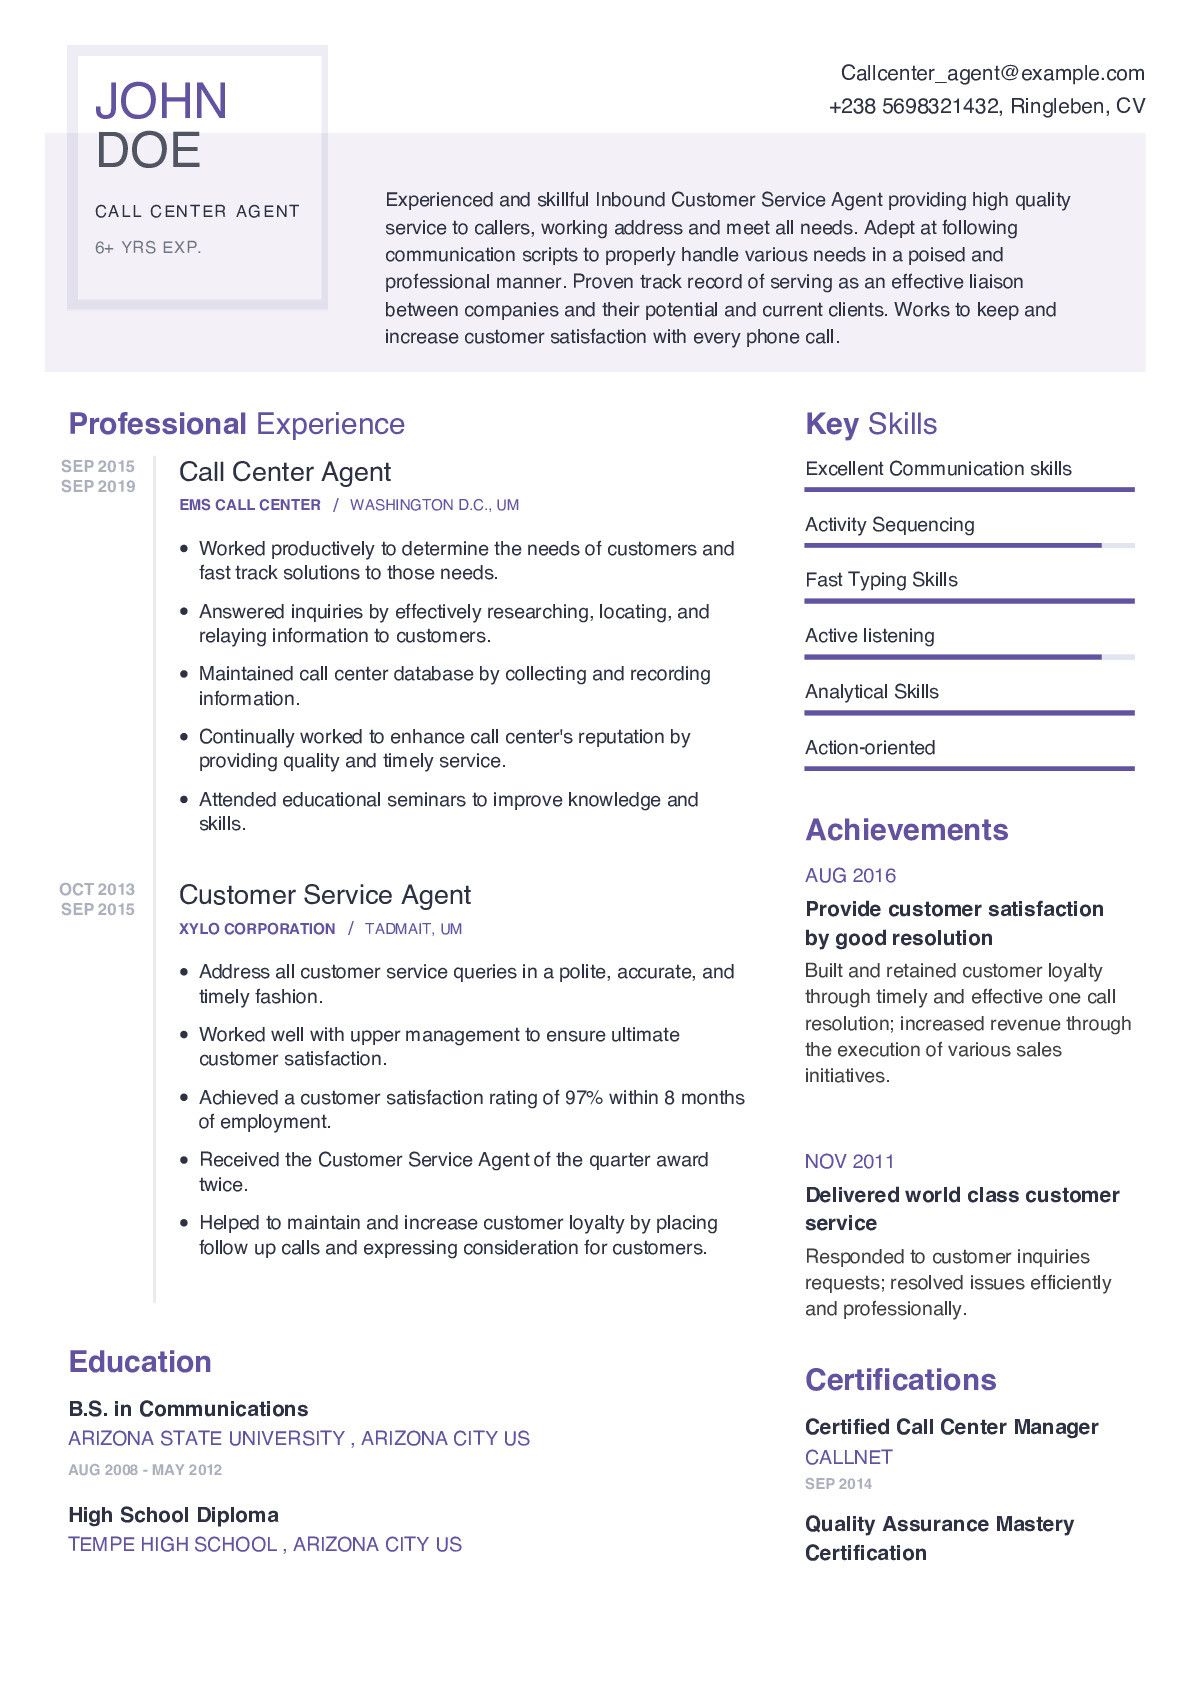 Resume Samples for Customer Service Call Center Call Center Agent Resume Example with Content Sample Craftmycv